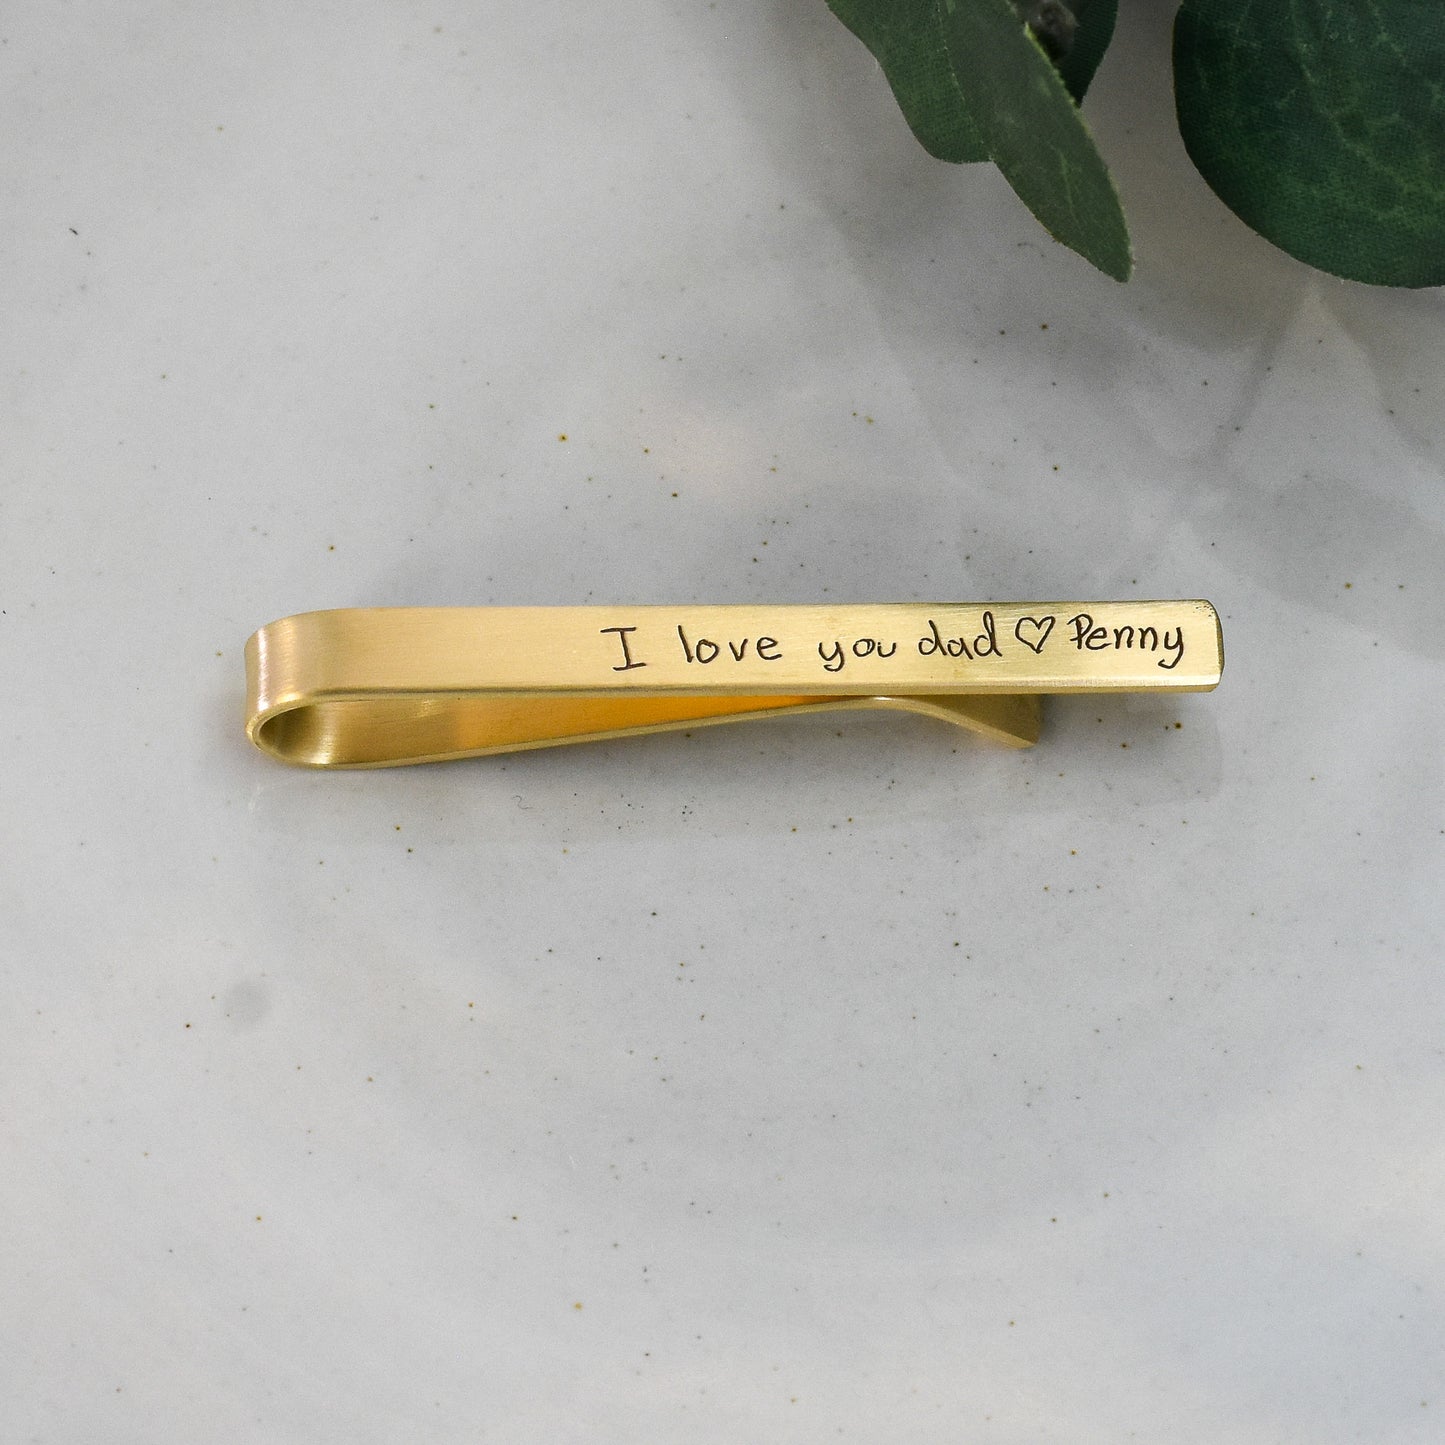 Engraved handwriting on gold brass tie clip.  I love you dad from daughter on Wedding day.  Father of the bride gift.